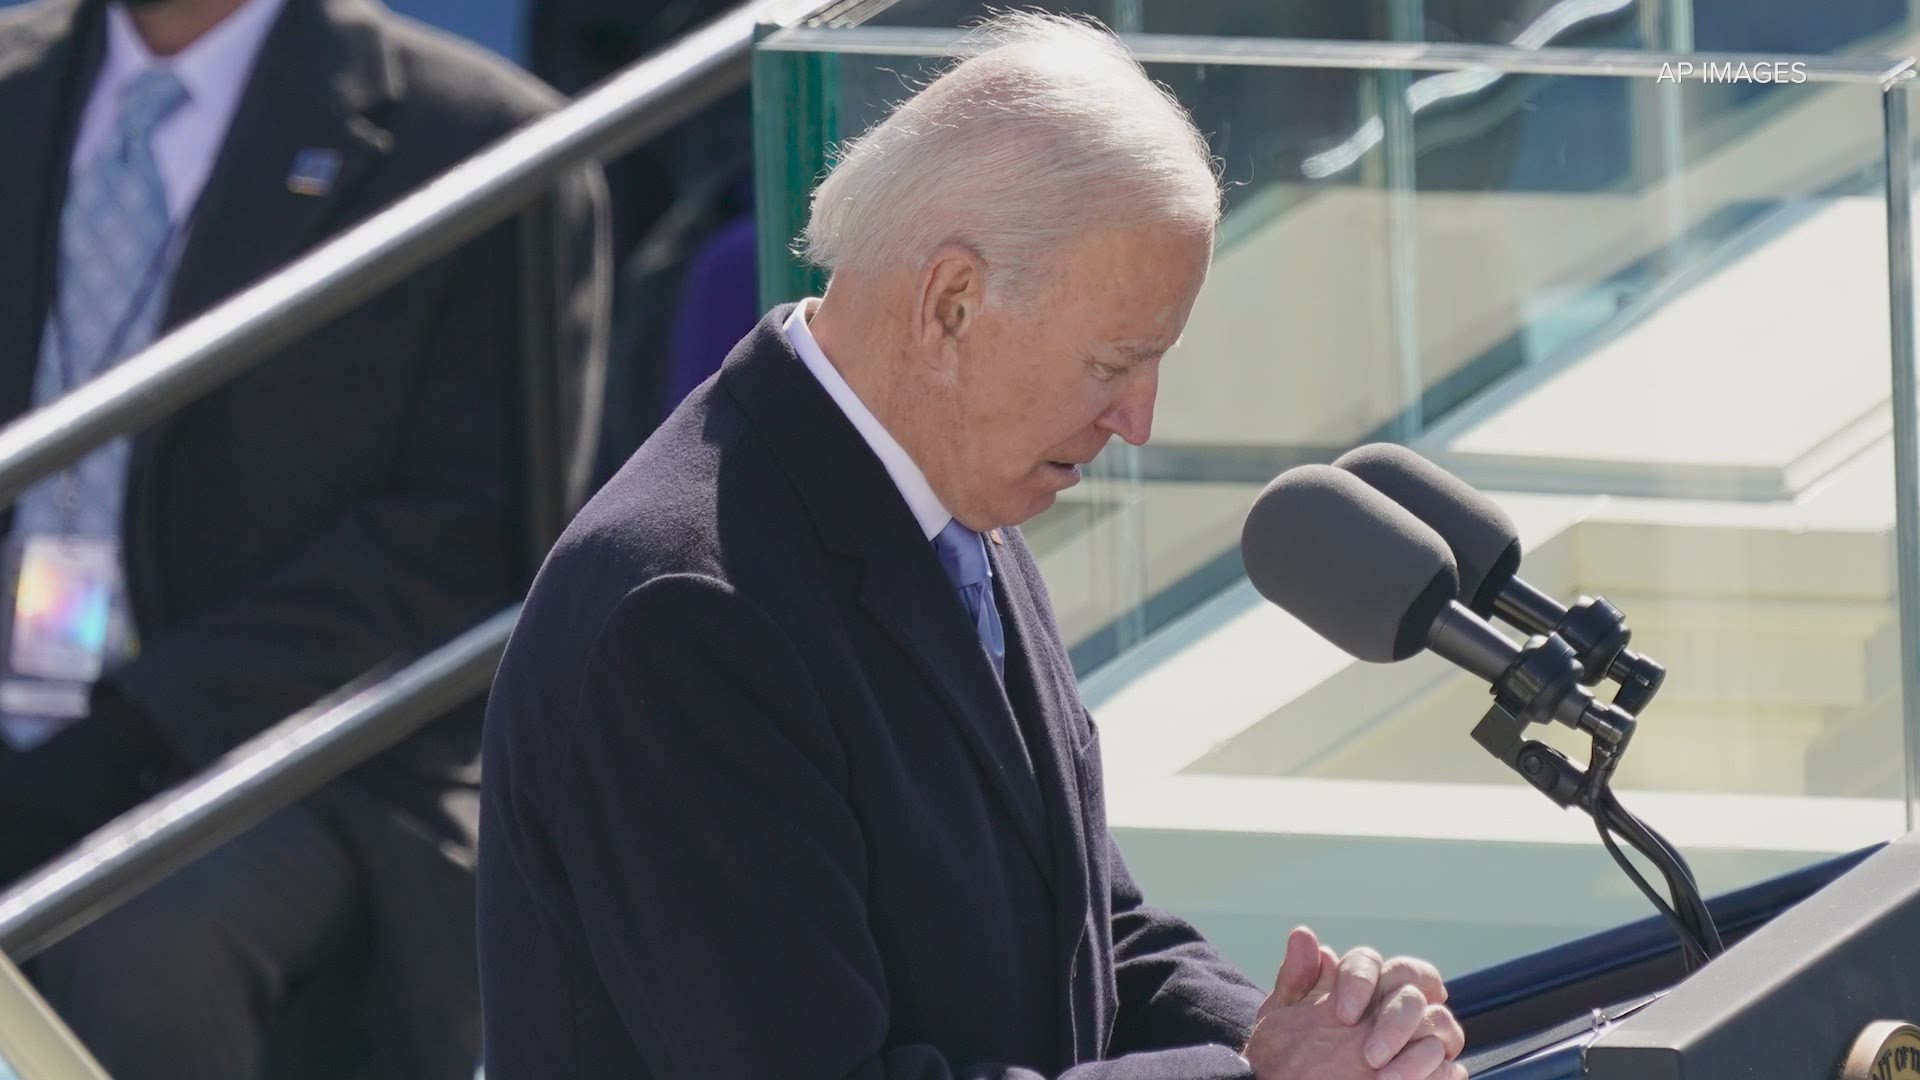 In his inaugural address, President Biden said America cannot fail if it acts together.